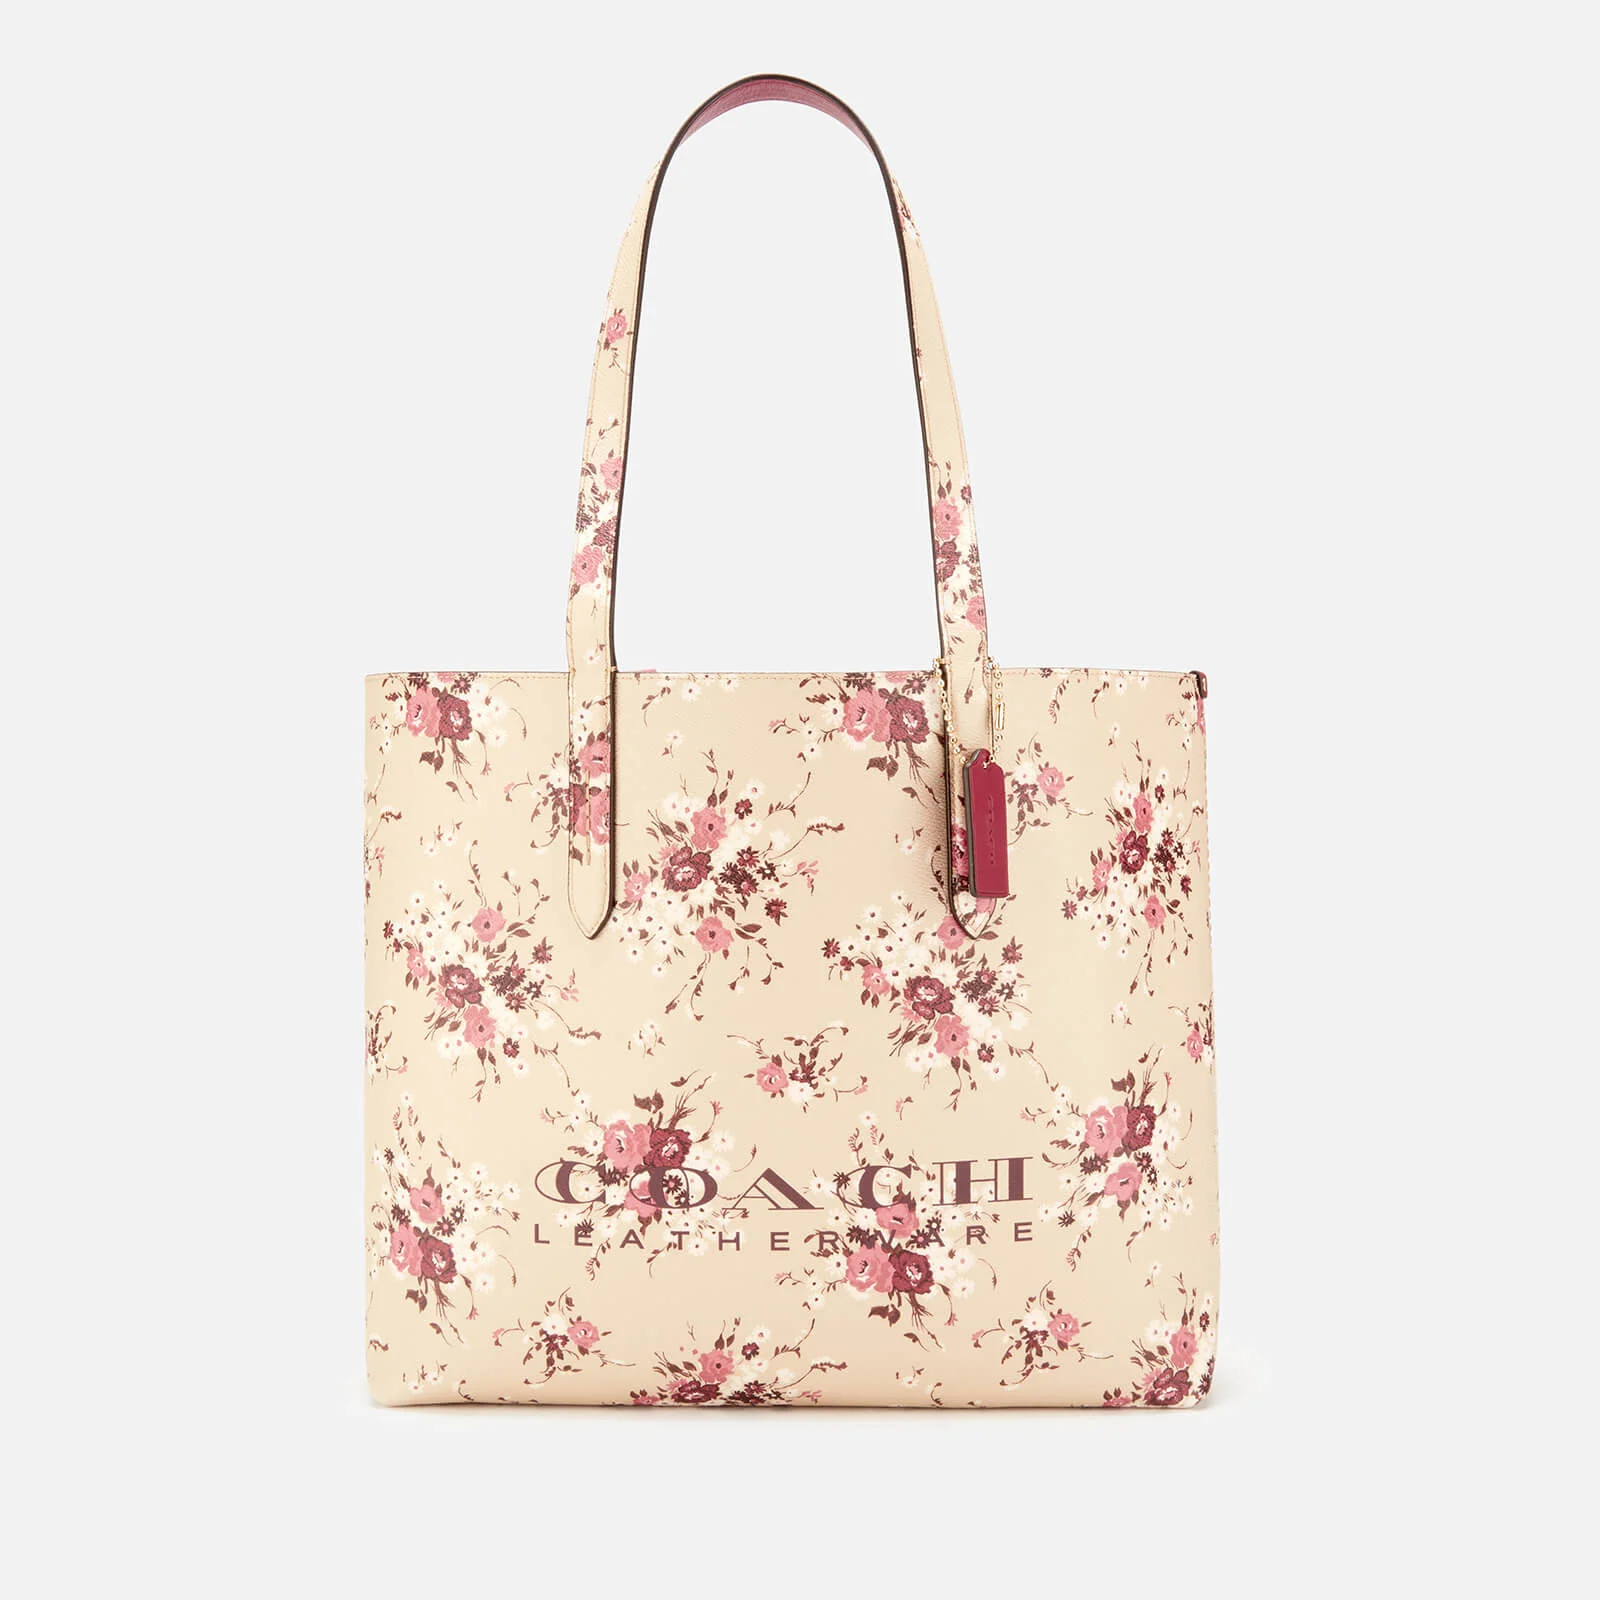 Coach Women's Floral Print Coach Highline Tote Bag - Beechwood Image 1